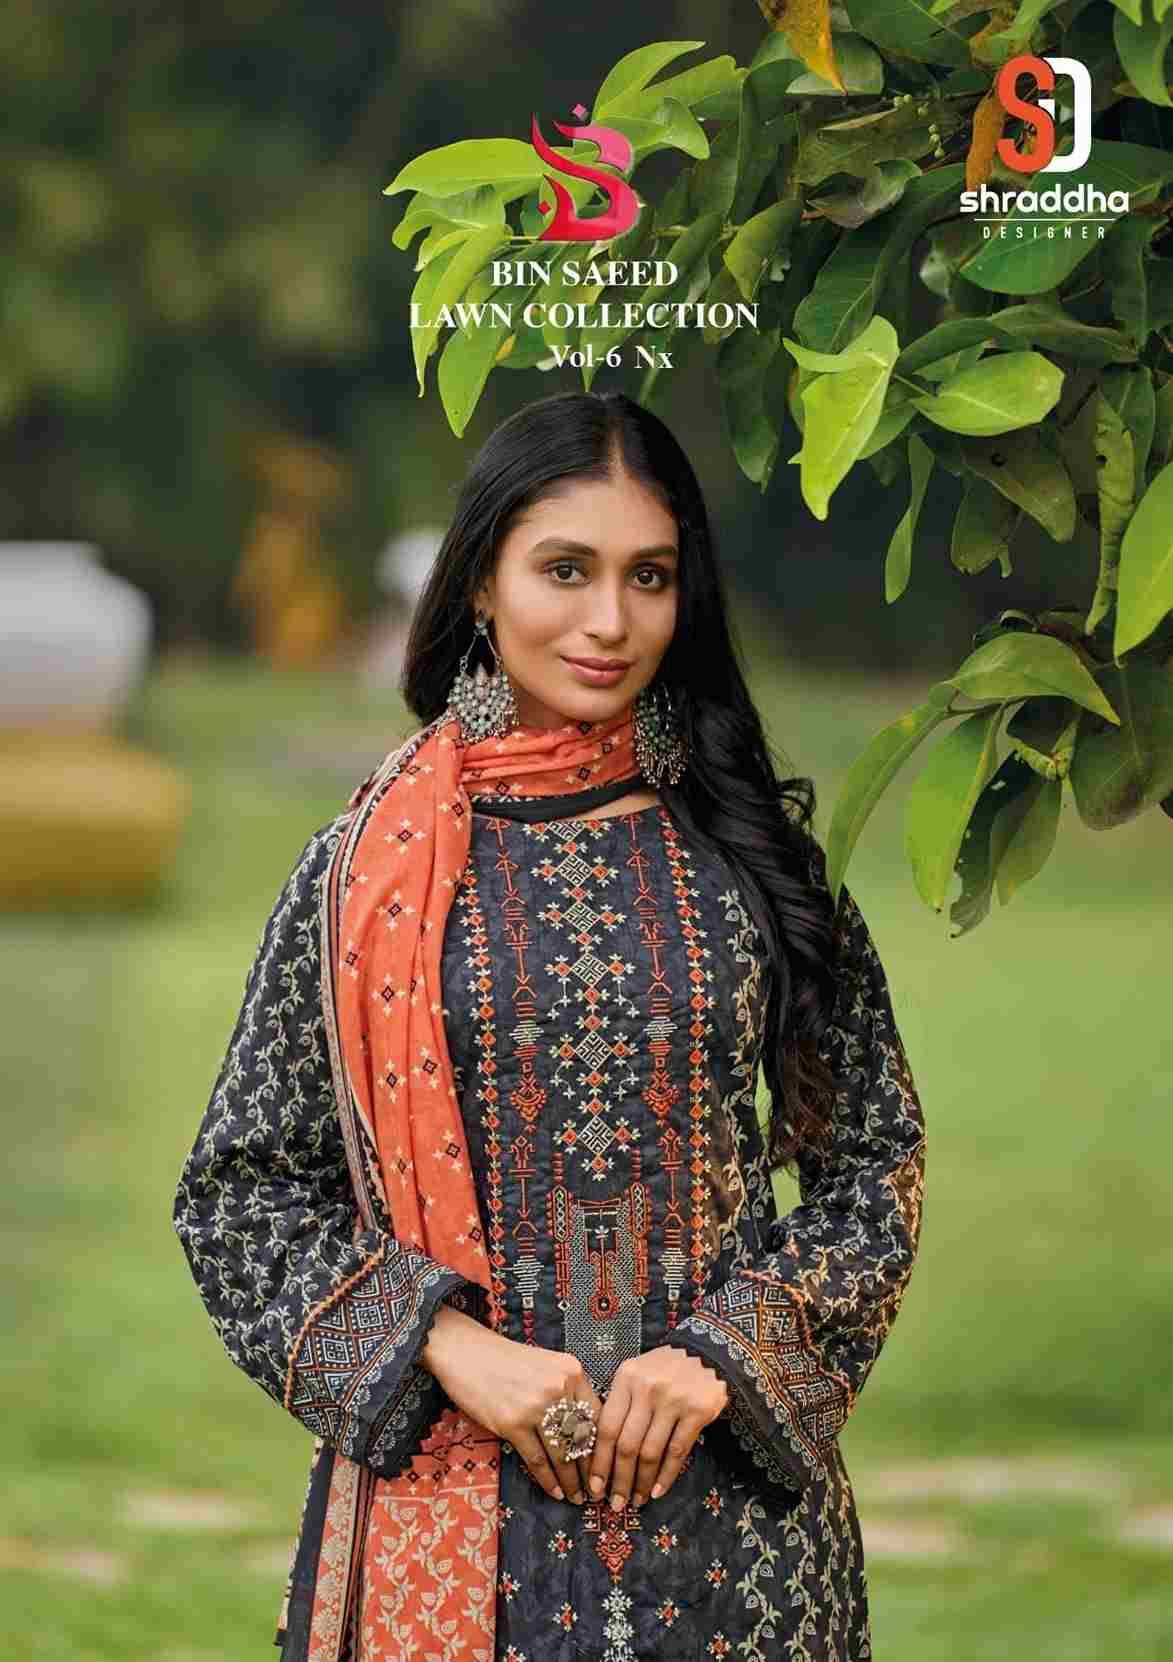 Bin Saeed Lawn Collection Vol-6 Nx By Shraddha Designer Designer Pakistani Suits Beautiful Fancy Stylish Colorful Party Wear & Occasional Wear Pure Cotton Print With Embroidery Dresses At Wholesale Price